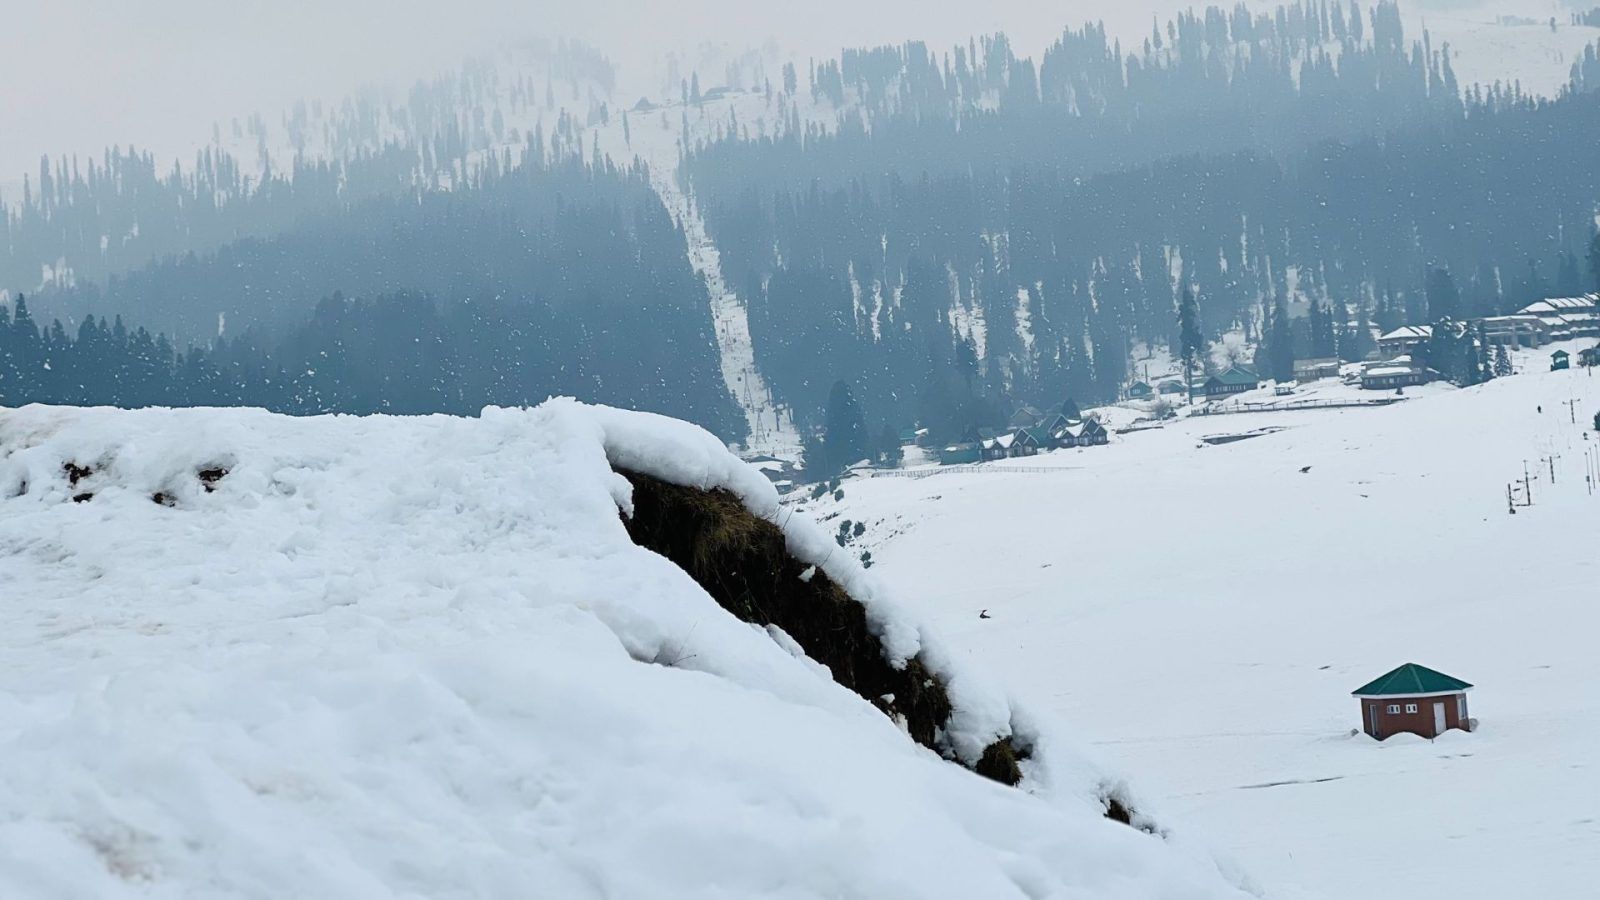 Kashmir Snowfall Mesmerising Images Of The WhiteCovered Valley